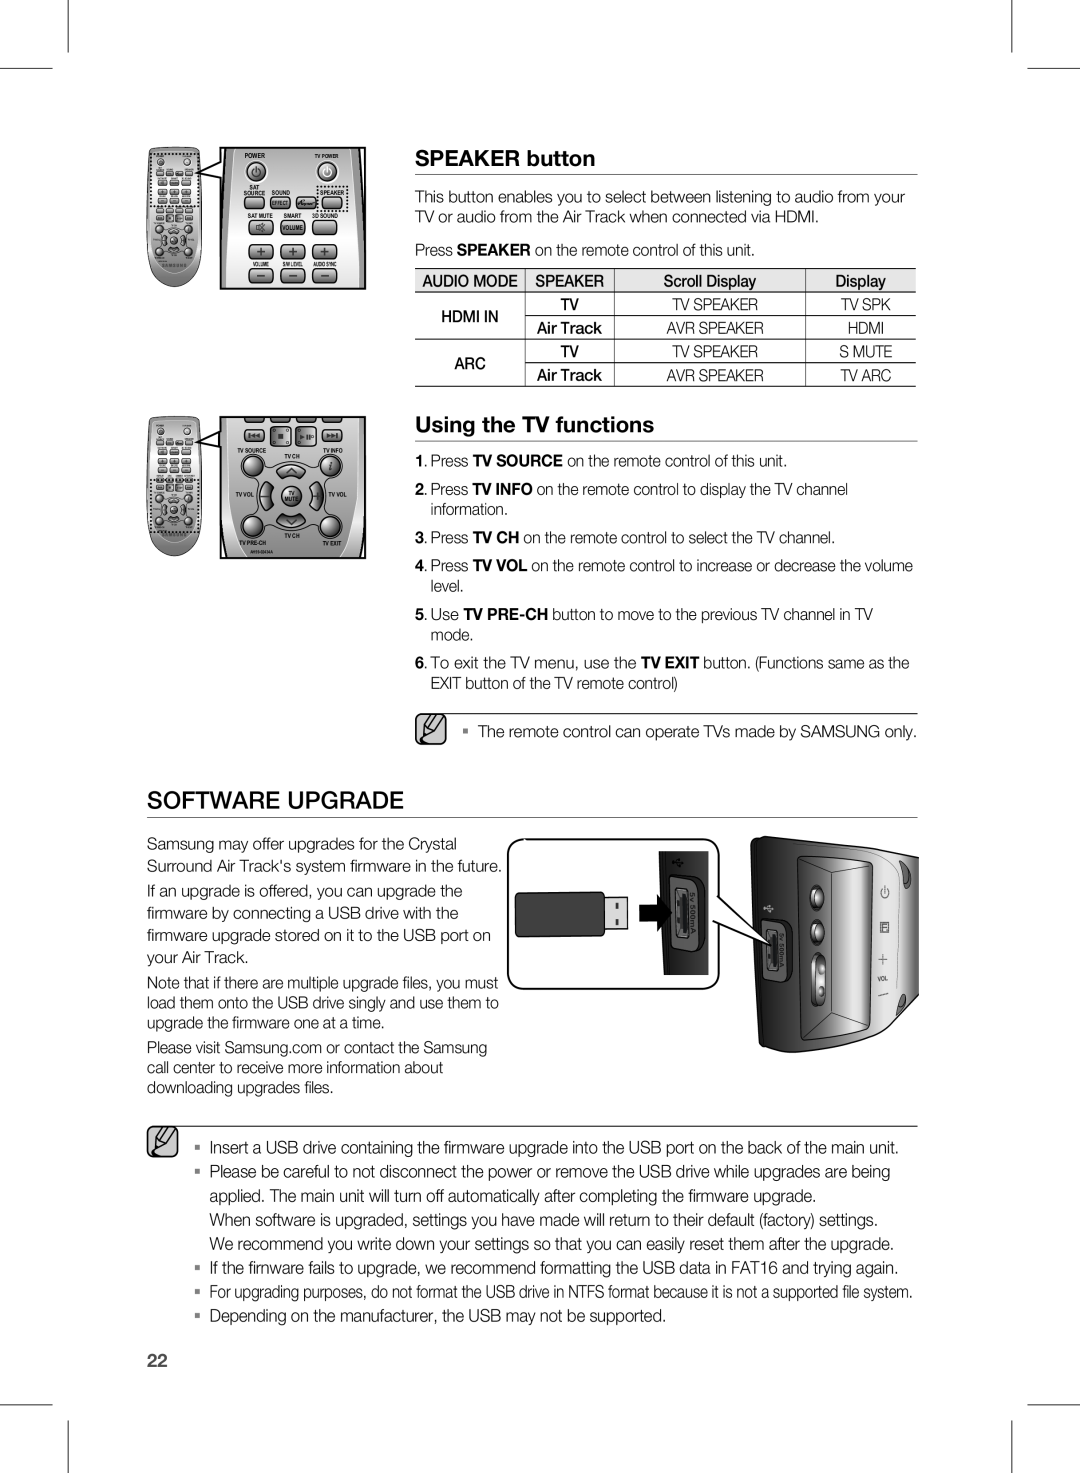 Samsung HW-E450C user manual Software Upgrade, SPEAKER button, Using the TV functions 